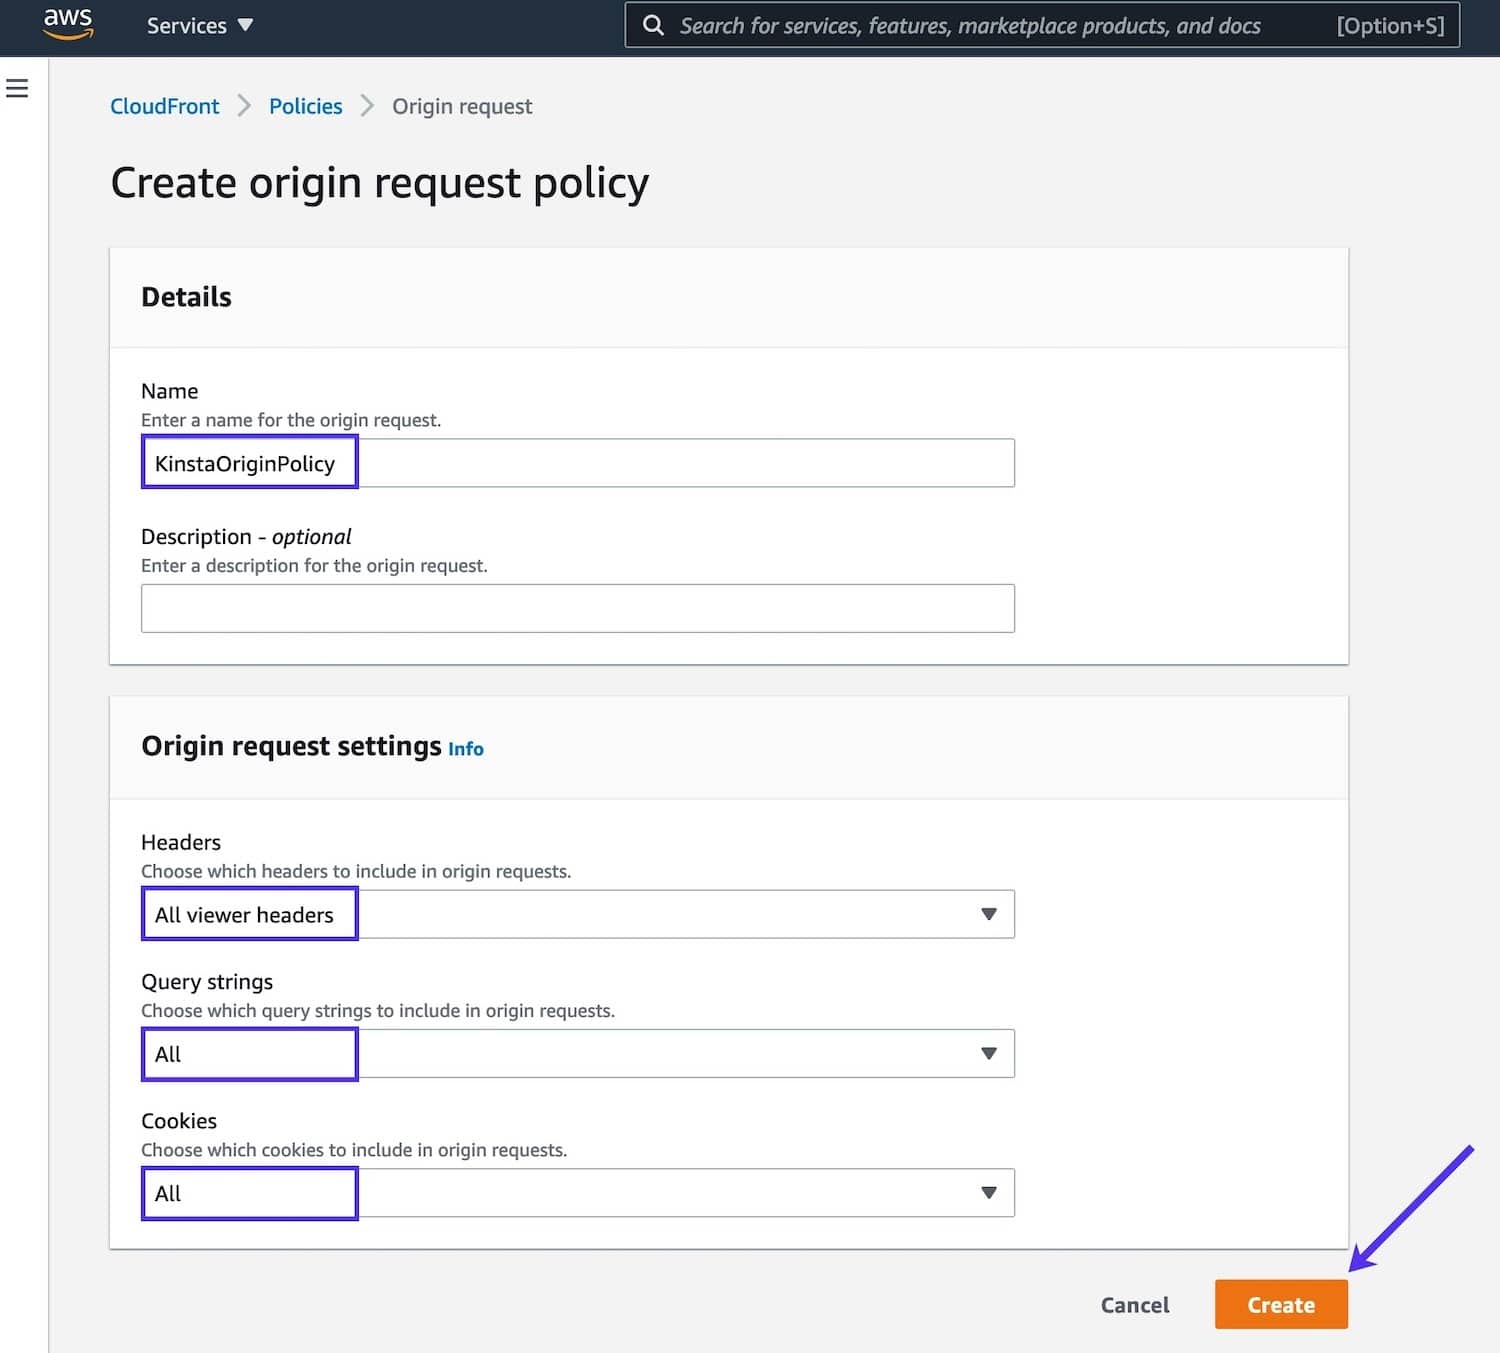 CloudFront Origin request policy settings.